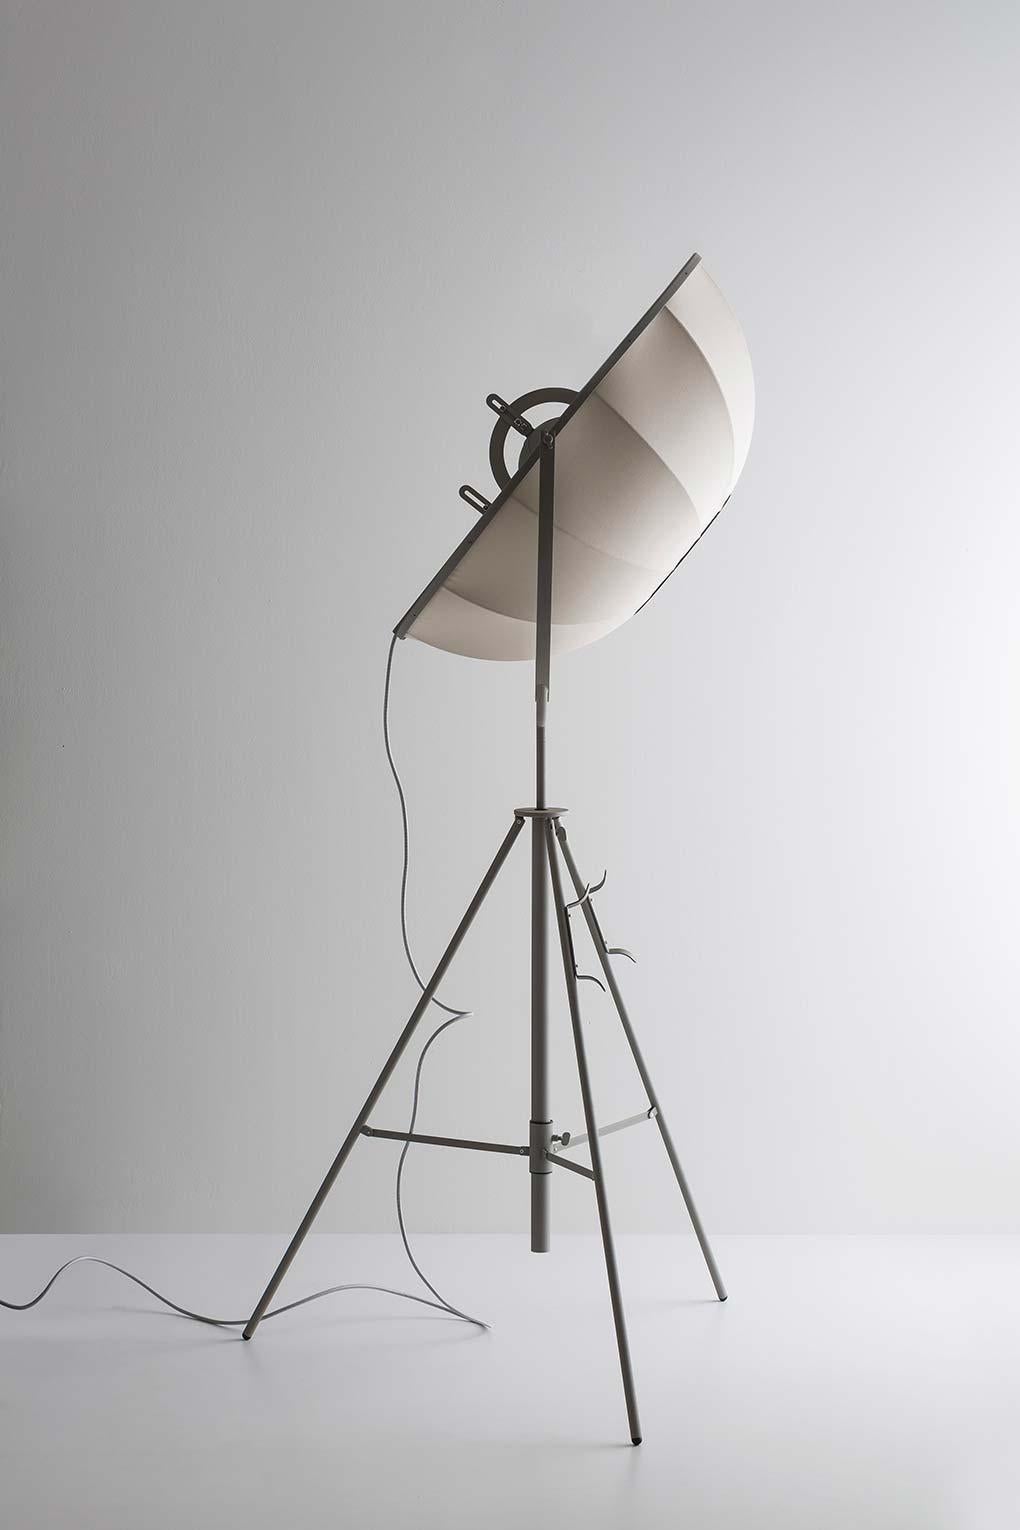 Mariano Fortuny y Madrazo 1907 Moda, gray, titanium modern floor lamp, Pallucco.

 Conceived by Mariano Fortuny in 1907, Fortuny was inspired by experiments he carried out in that year on a new indirect lighting system for stage lighting. His